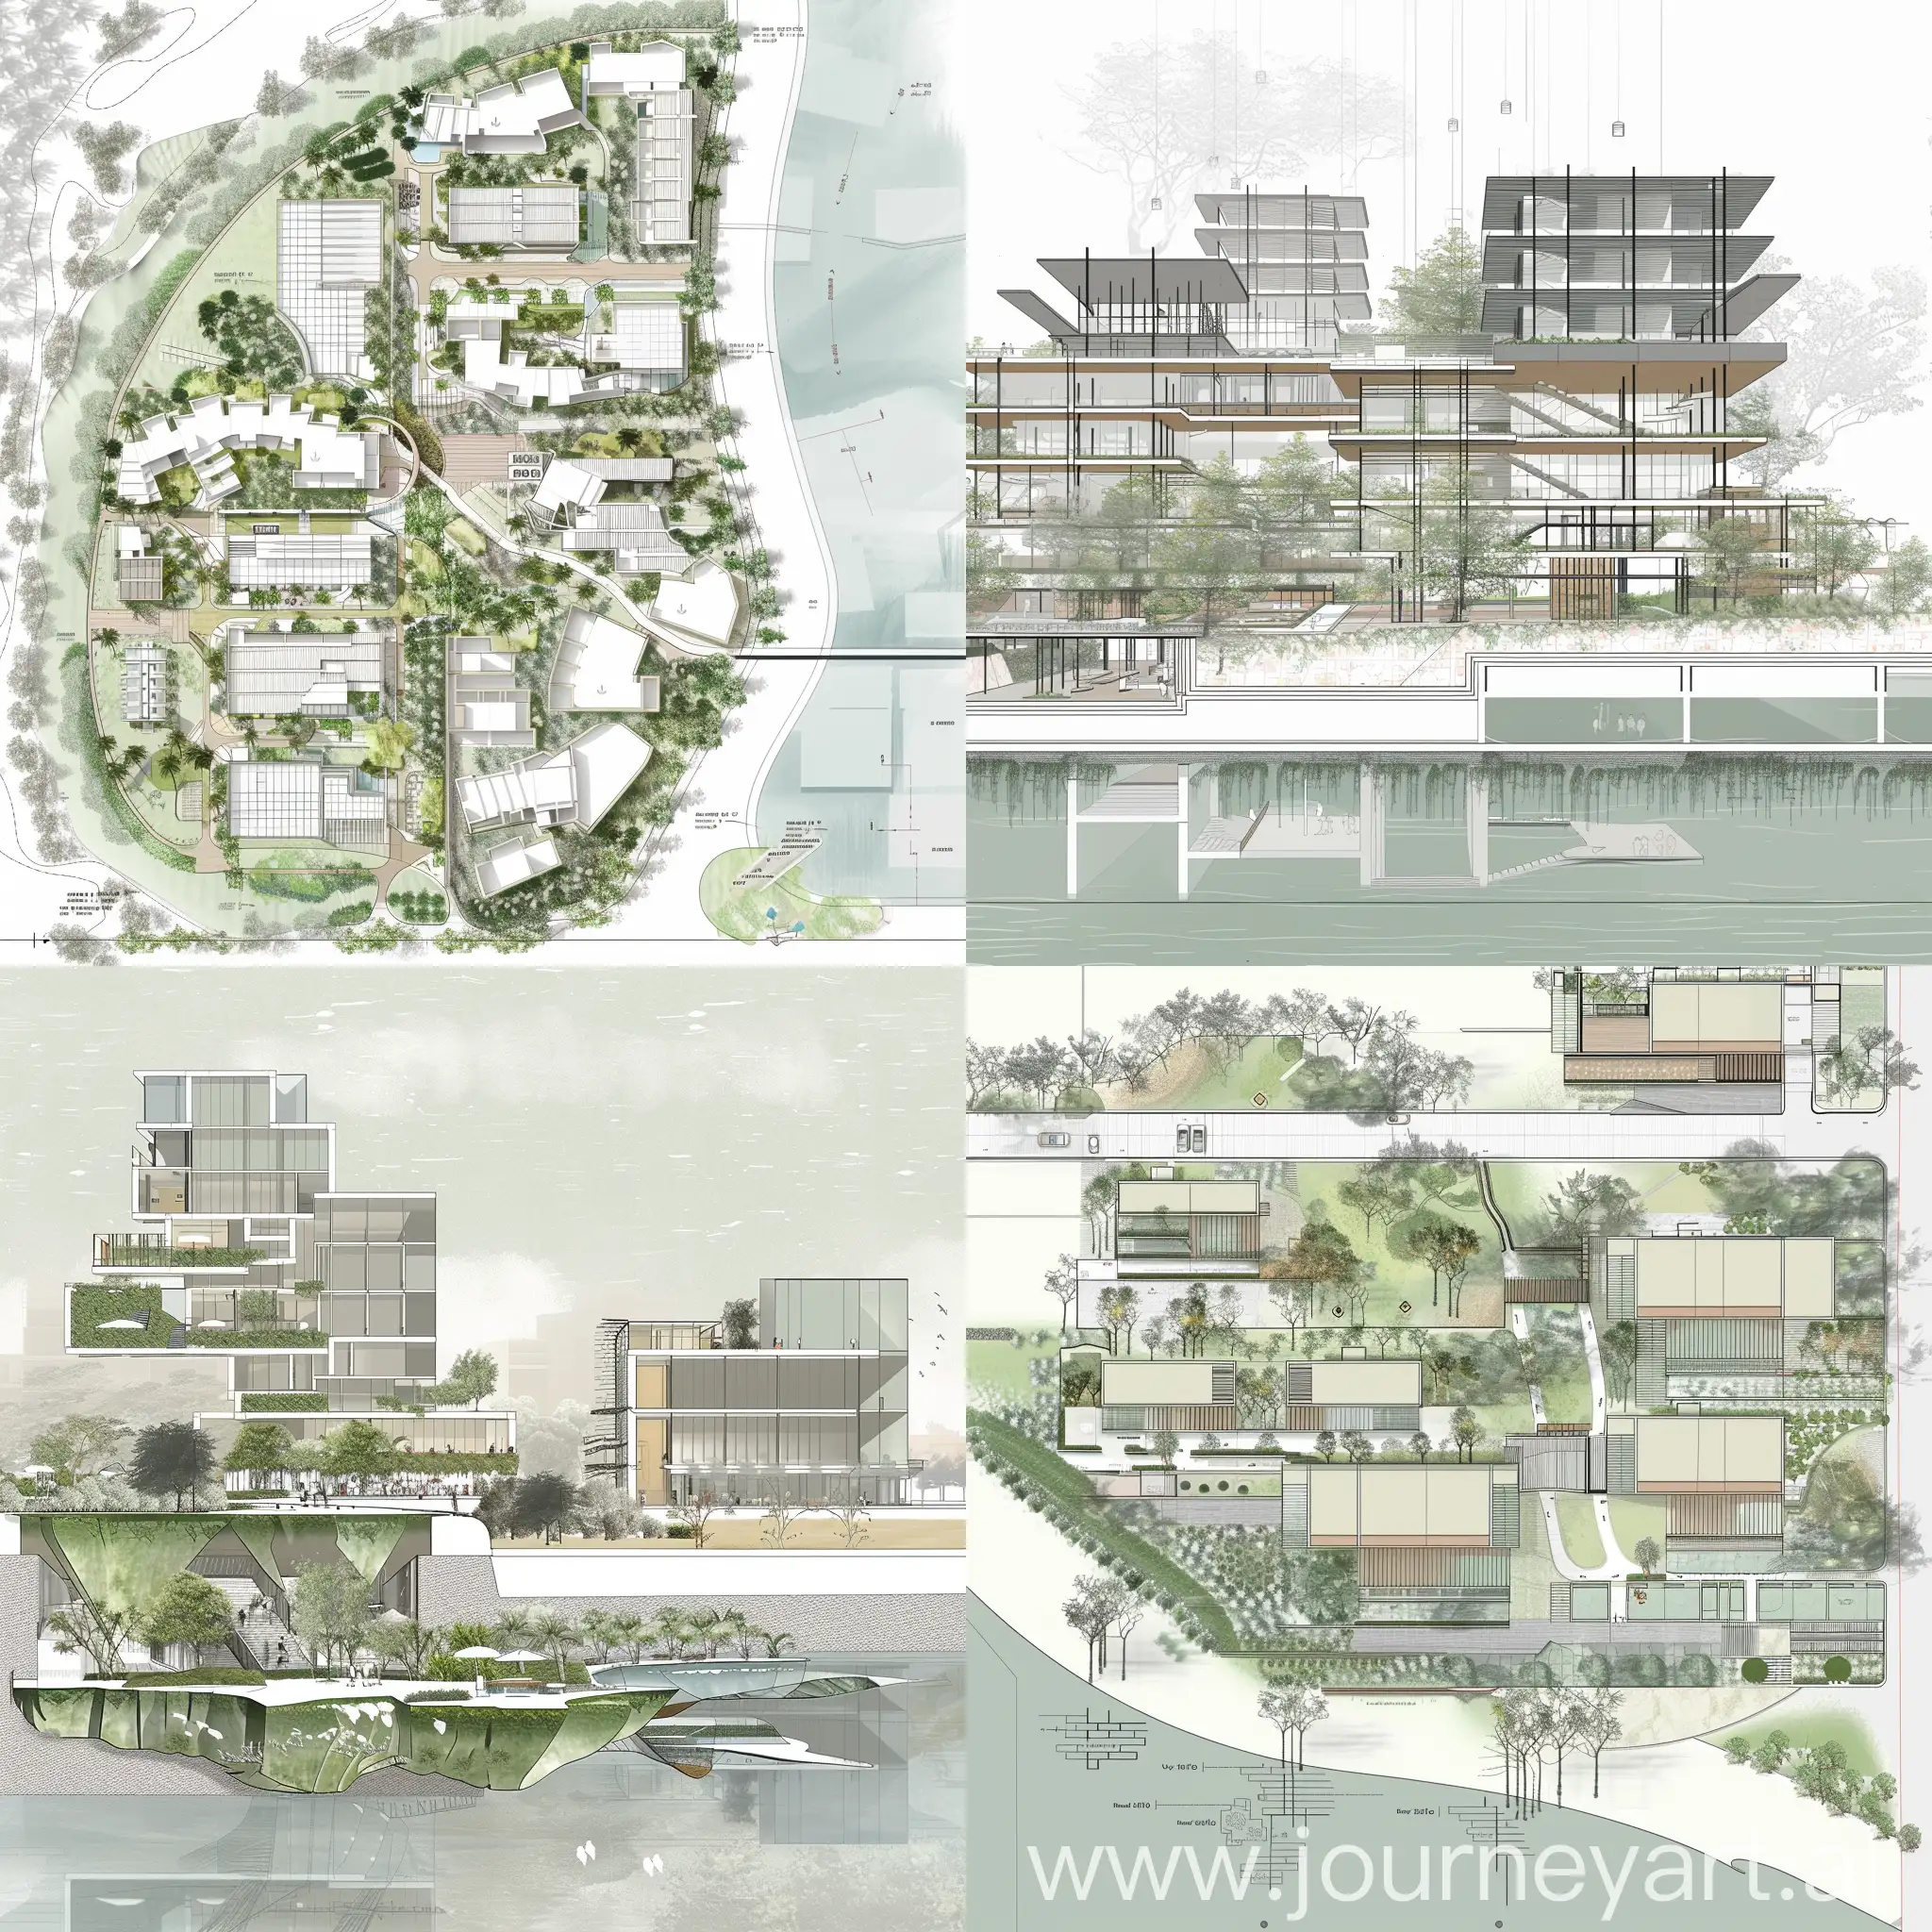 Design an architecture plan and section in 2d for a business park and the buildings take form from mangrove restoration.